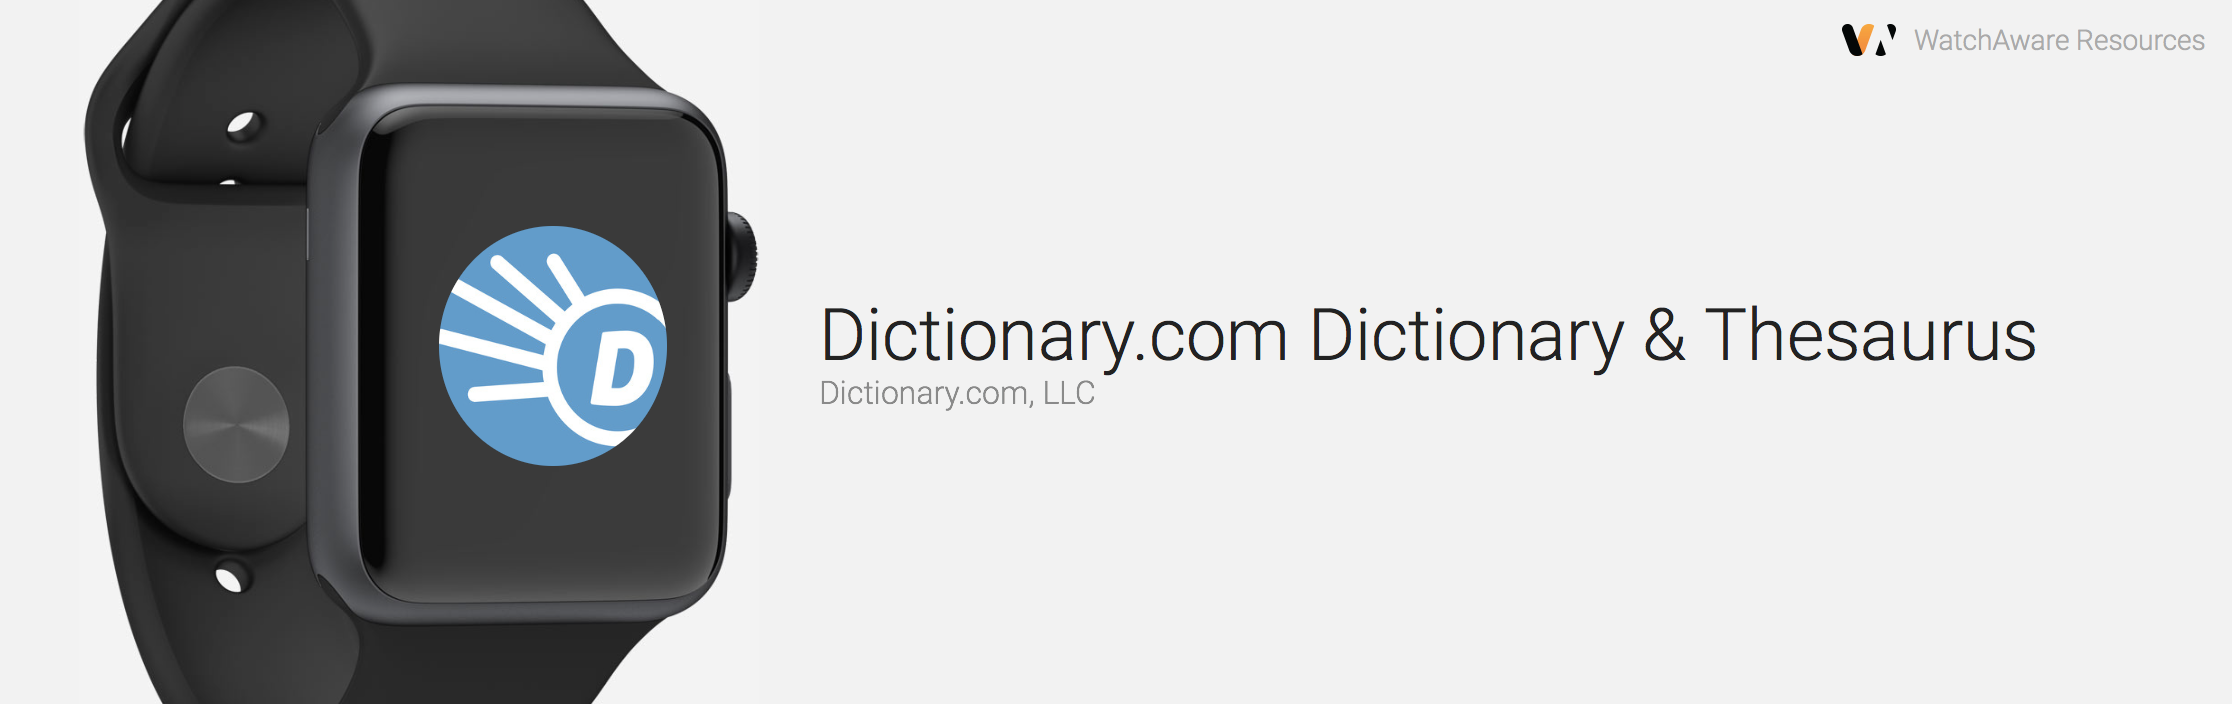 Dictionary.com is a Handy App for Apple Watch